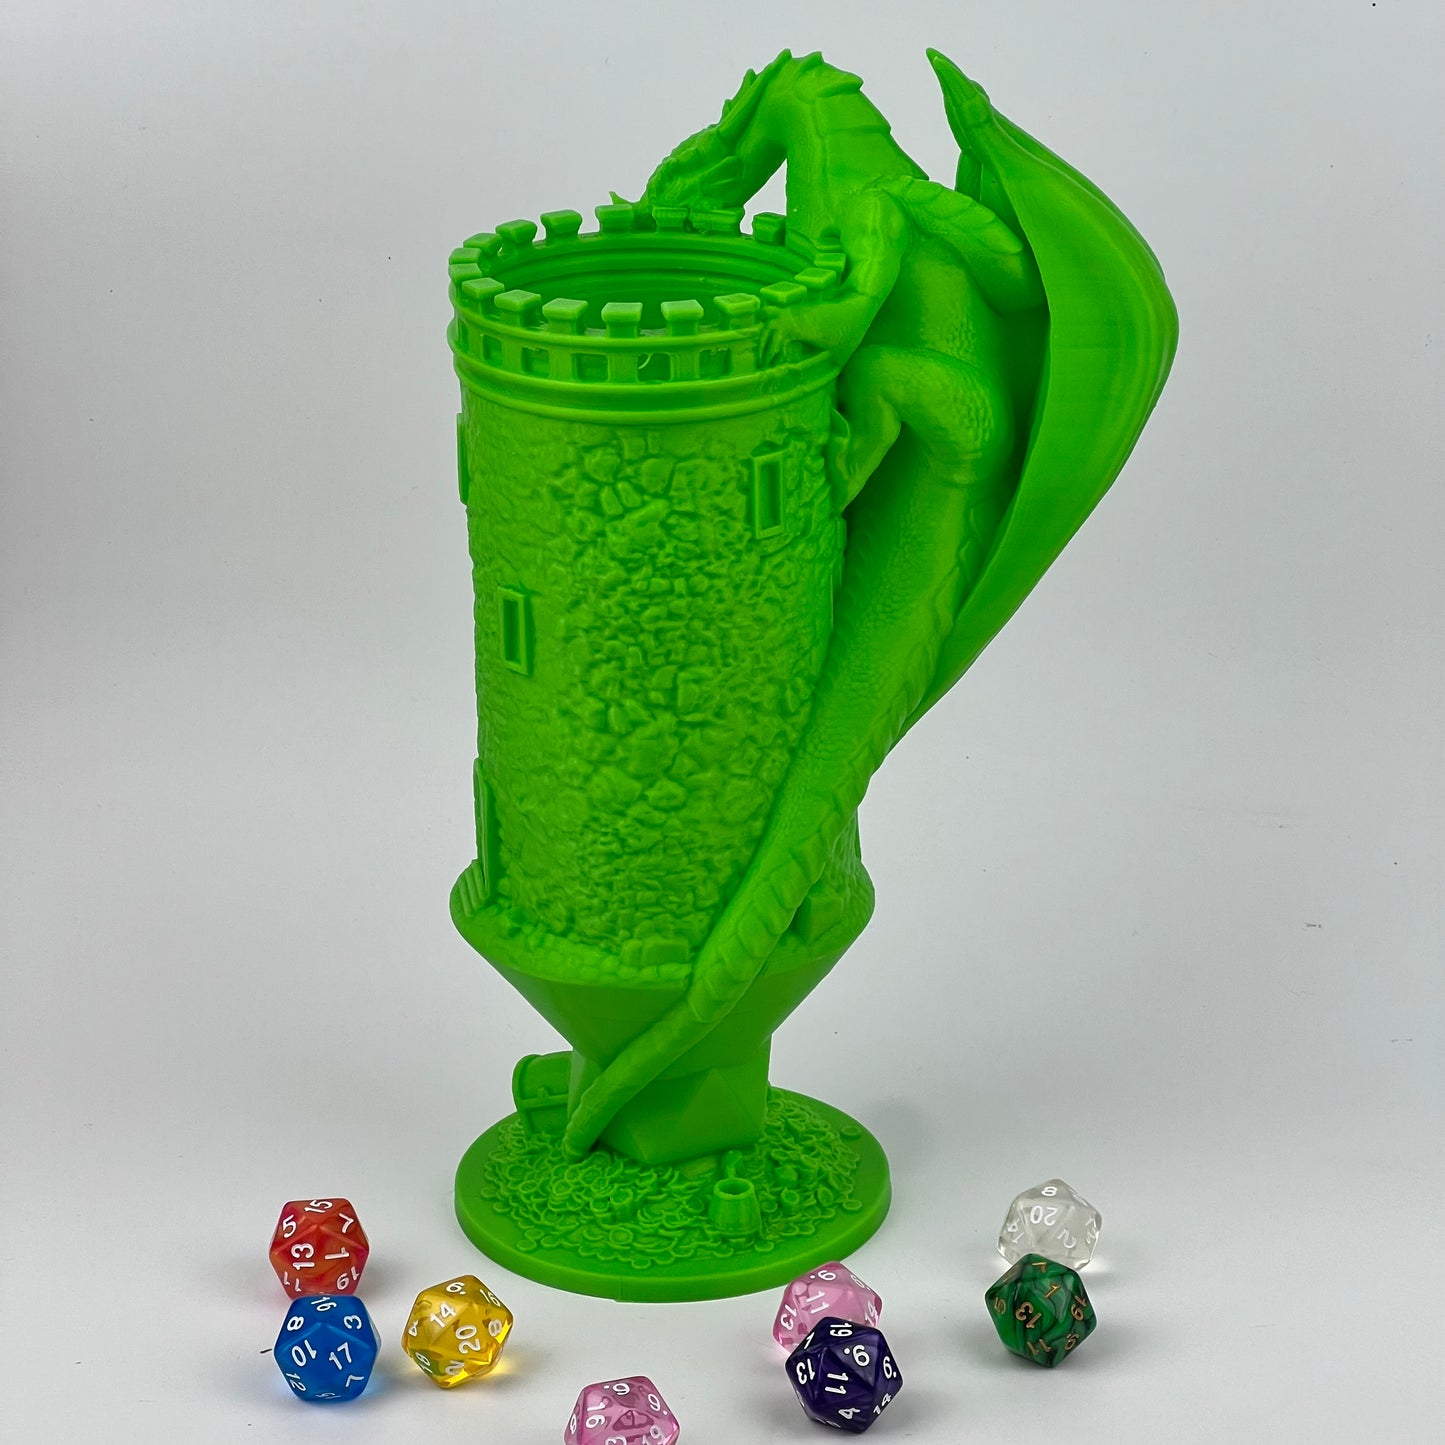 The Game Master Mythic Mugs Dice Holder GST3d (Best for Painting)